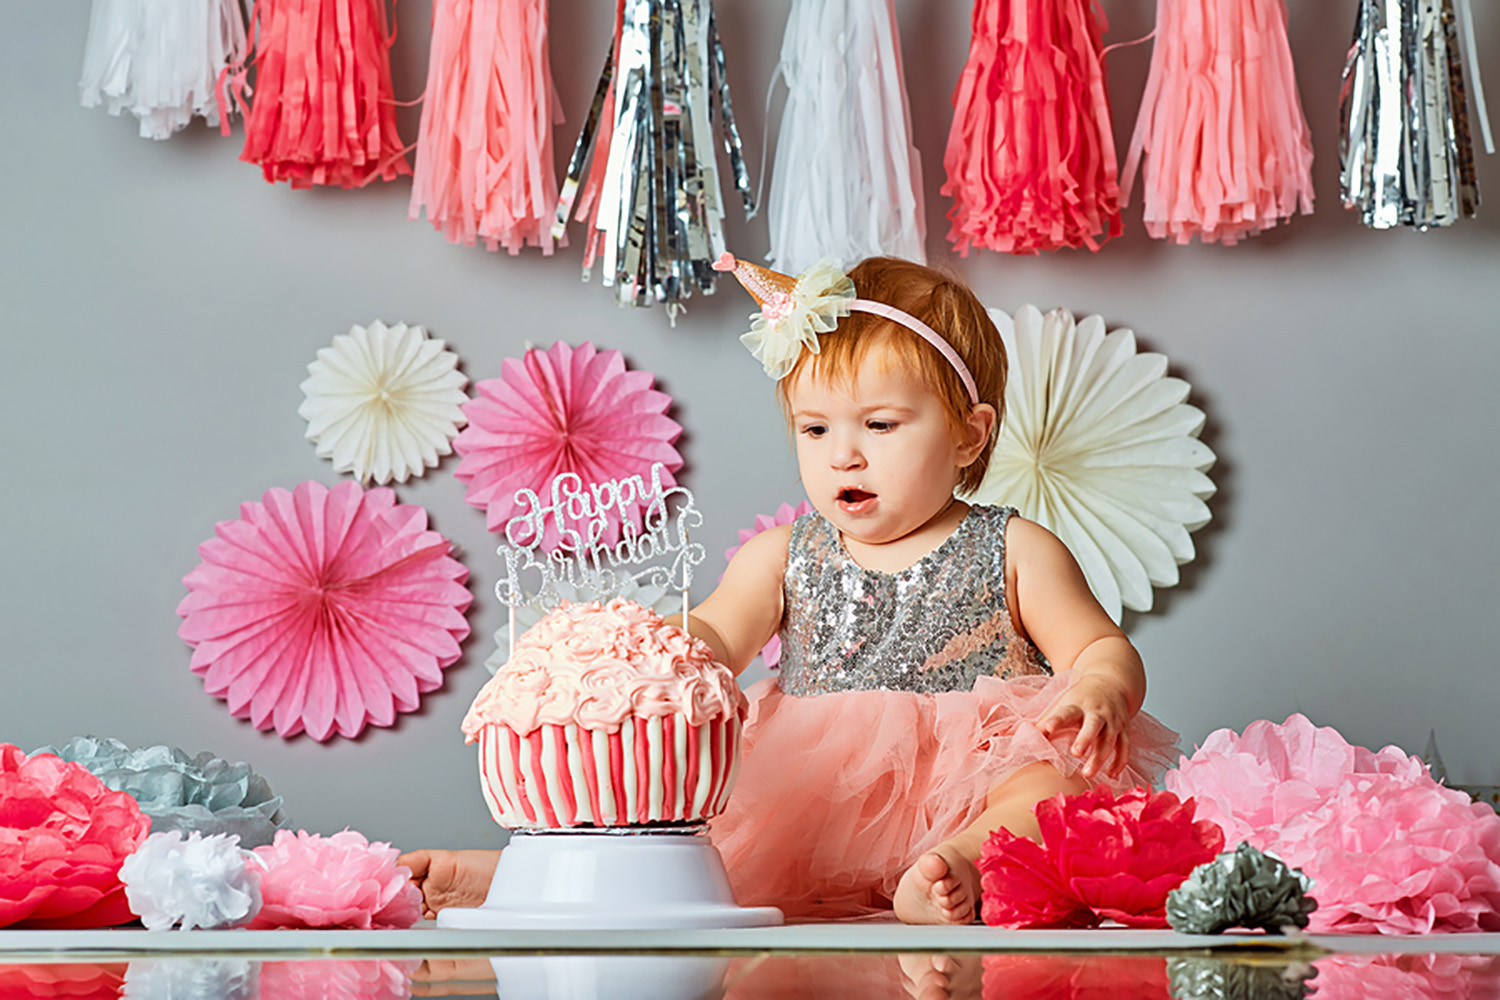 Birthday Party Ideas For Babies
 Baby s 1st Birthday Gifts & Party Ideas for Boys & Girls